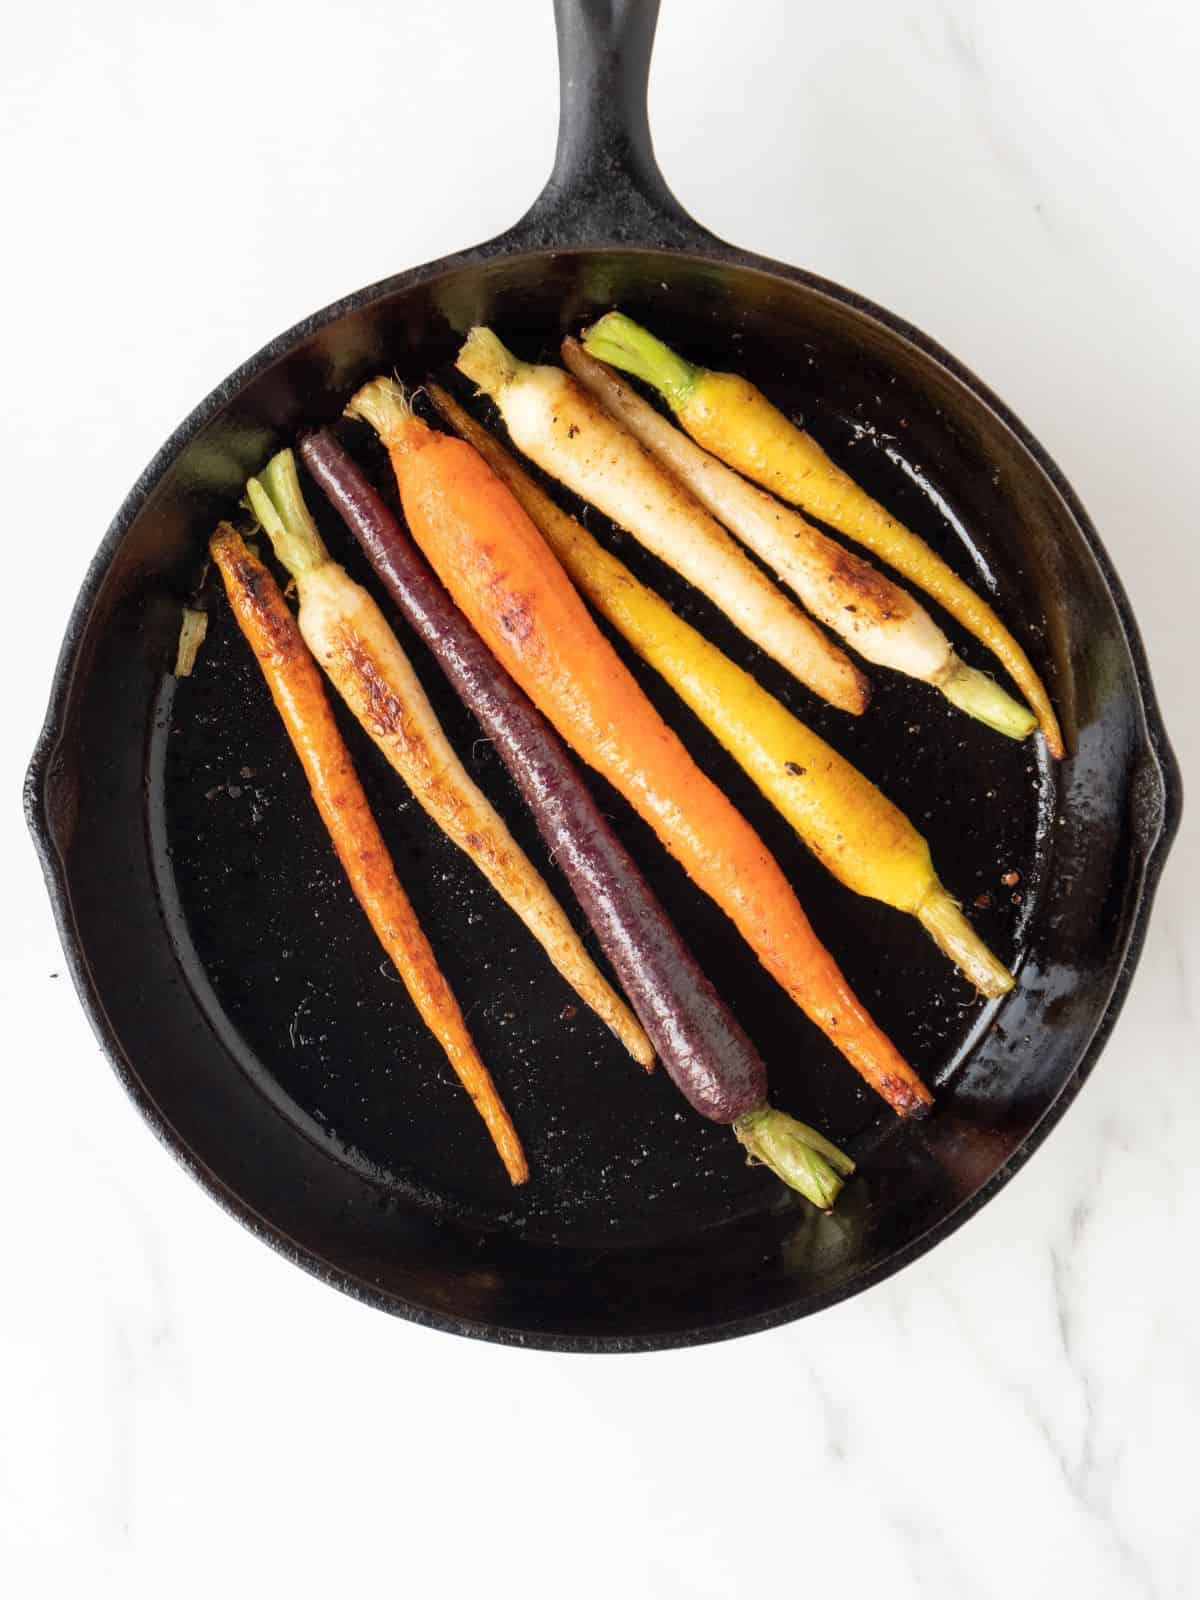 A skillet with rainbow carrots whole.